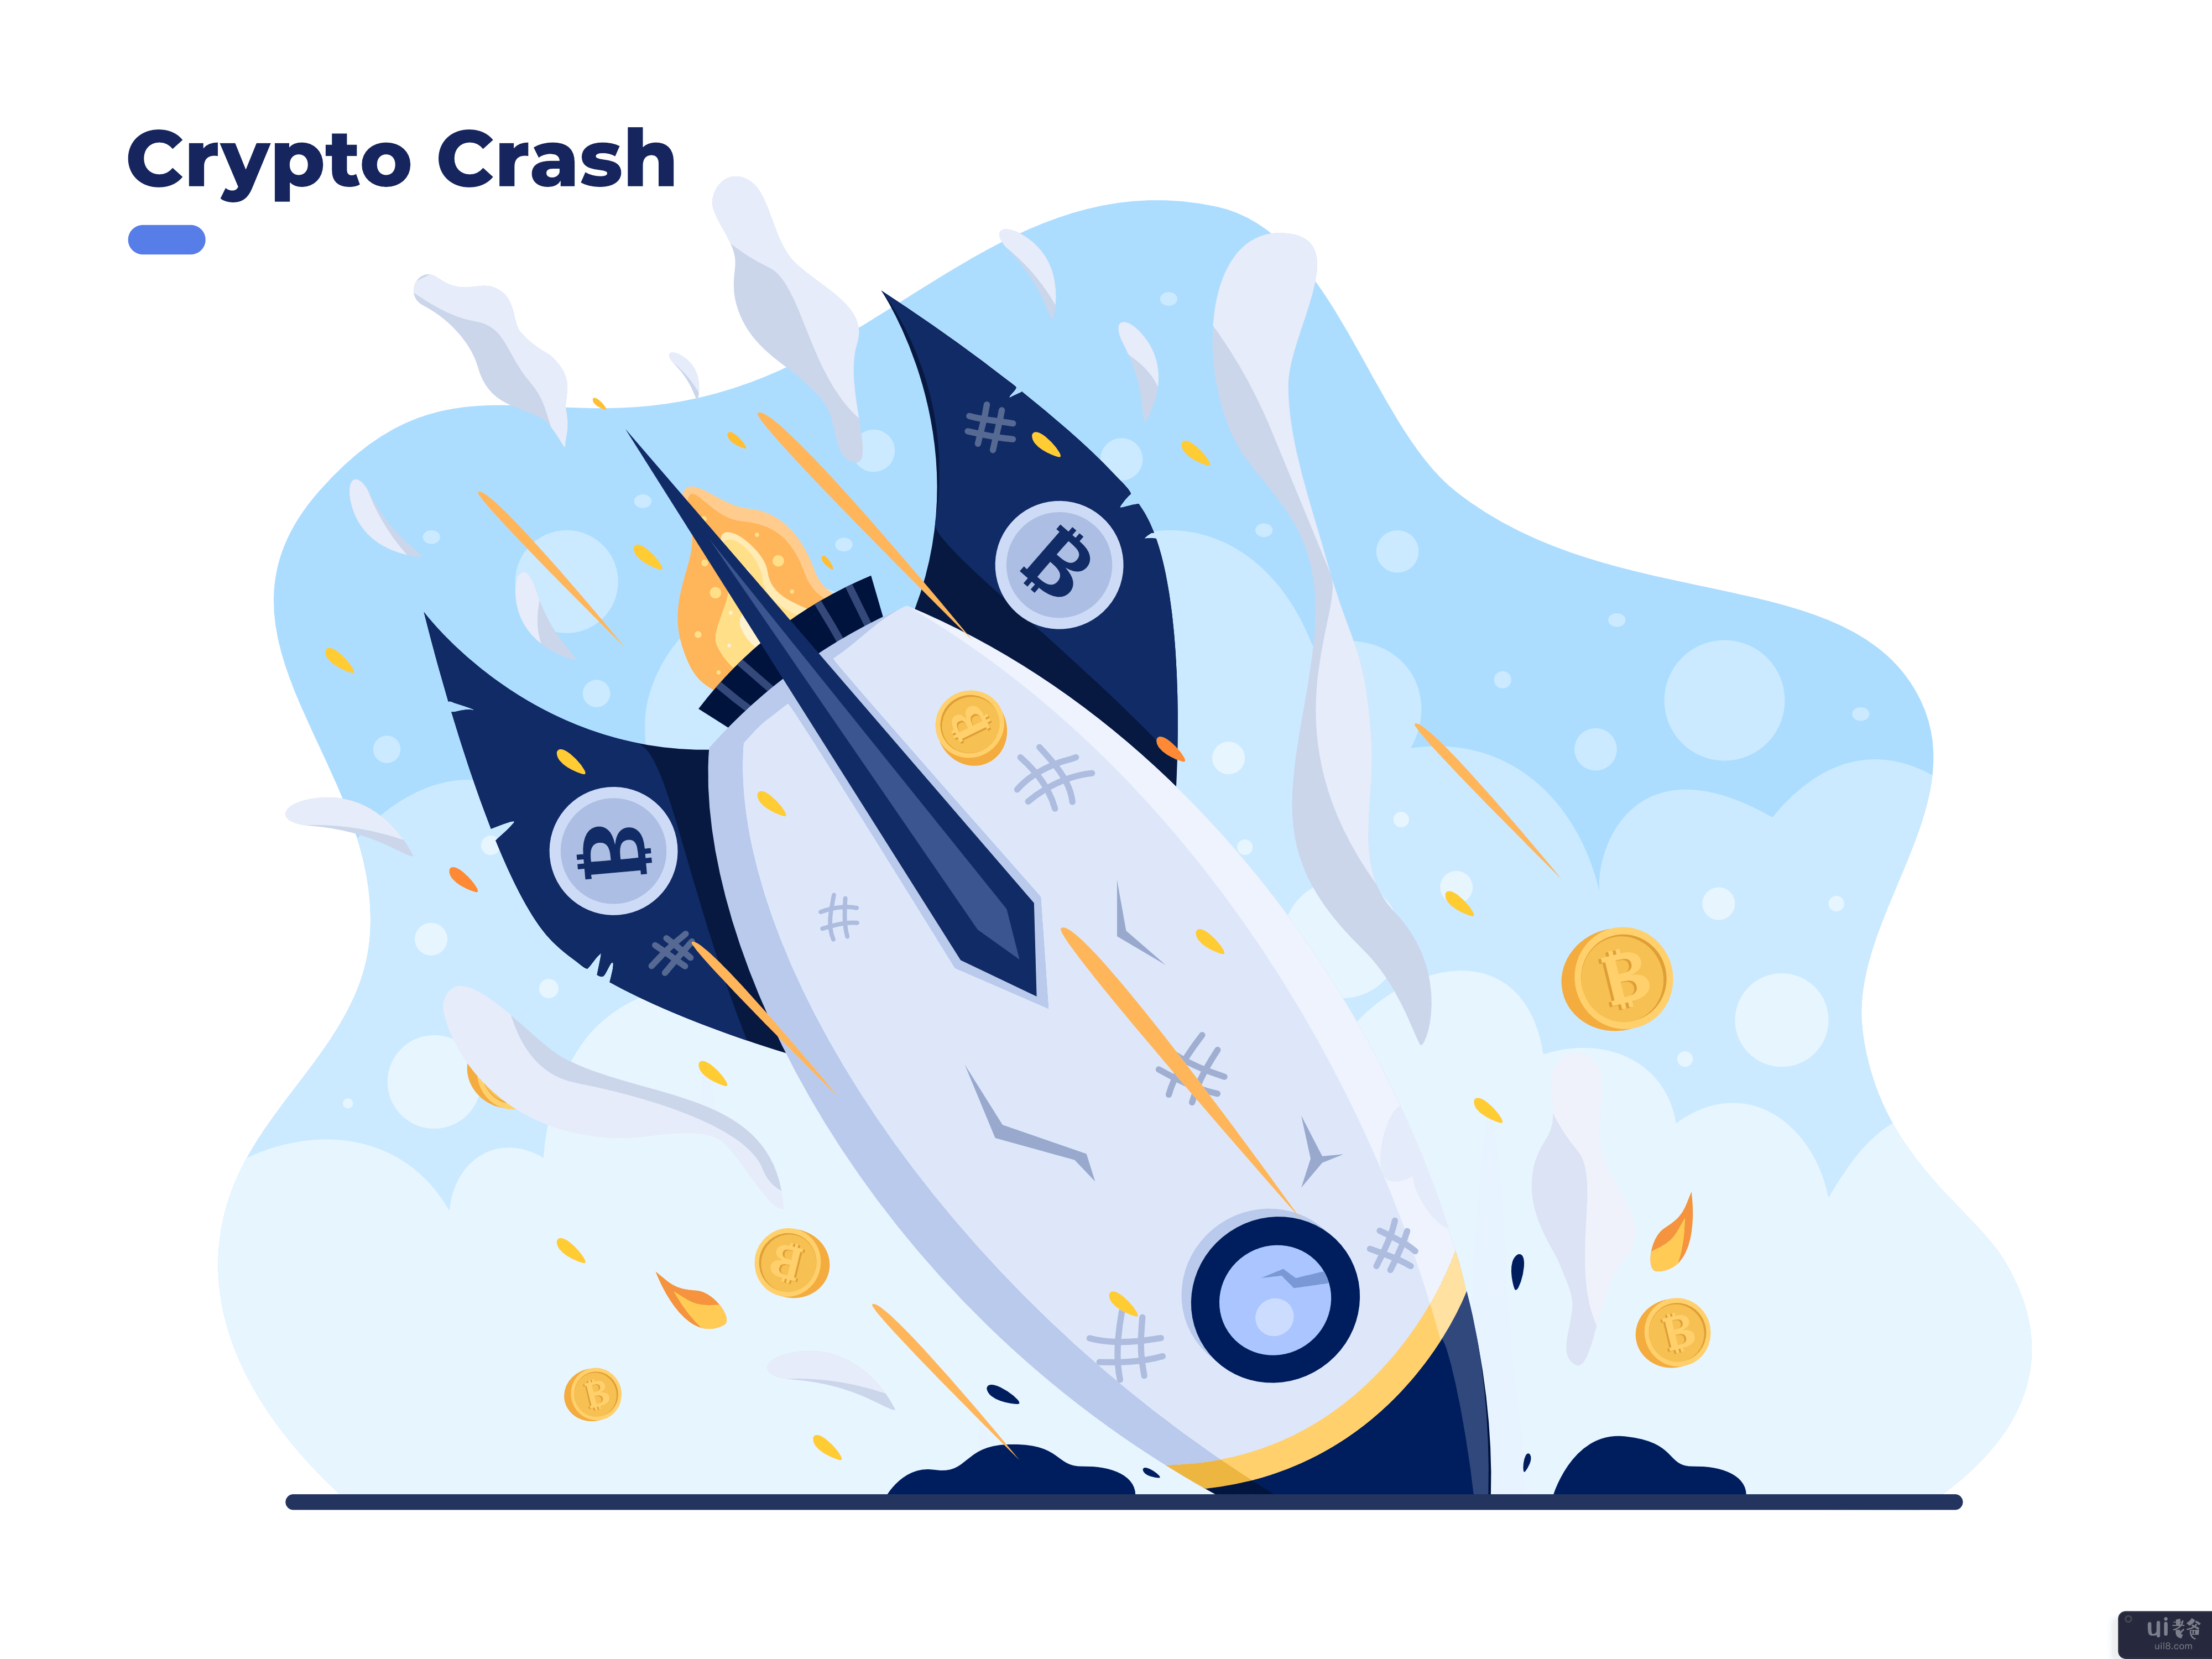 Cryptocurrency 崩溃和价格崩溃平插图(Cryptocurrency Crash and price collapes flat illustration)插图2